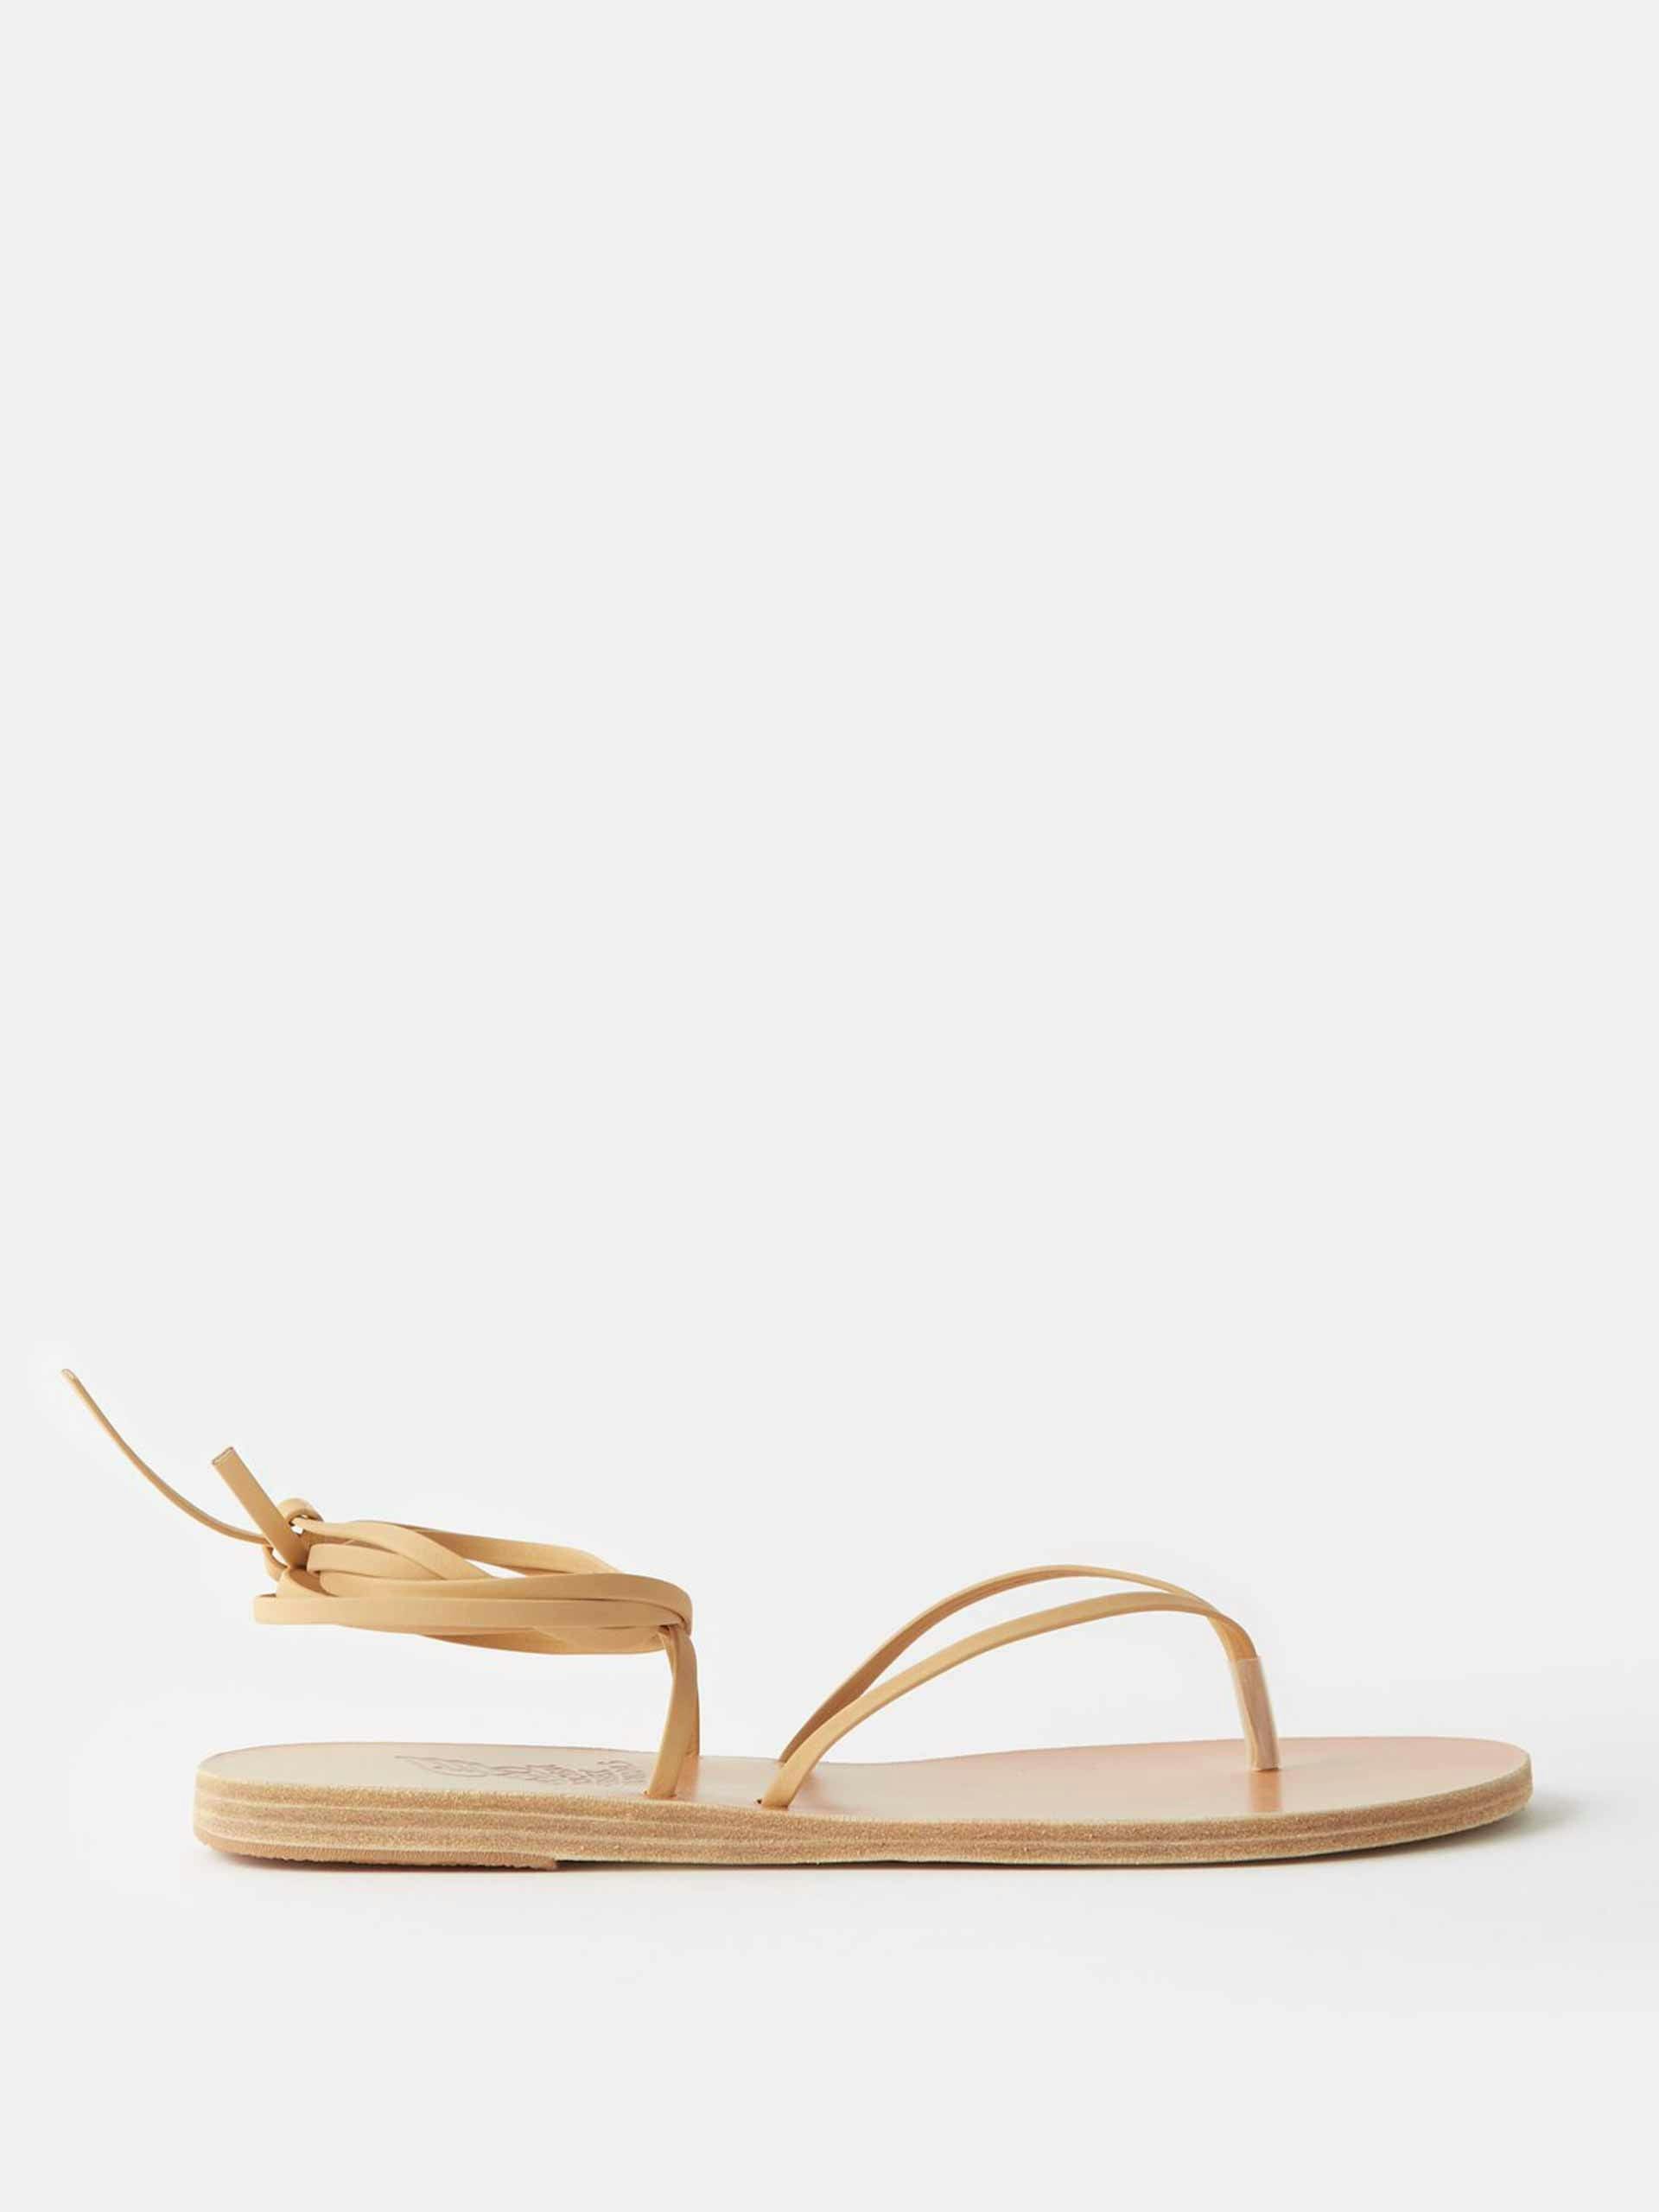 Beige ankle-tie leather sandals